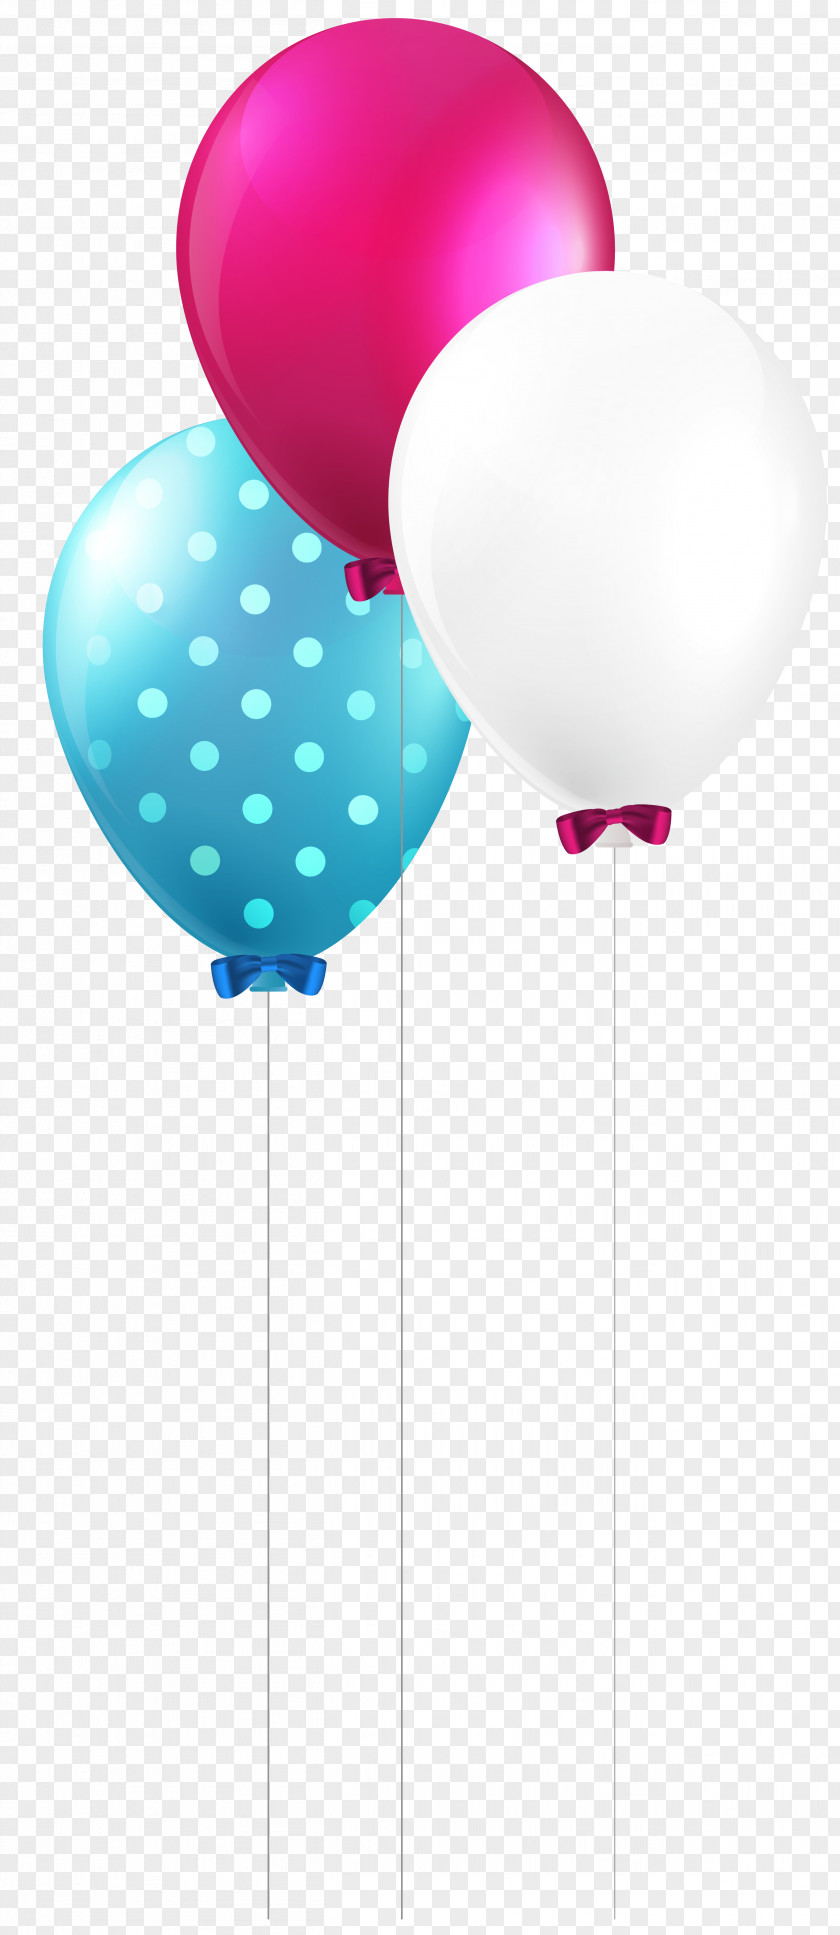 Red Baloons A Tale Of Five Balloons Toy Balloon Clip Art PNG